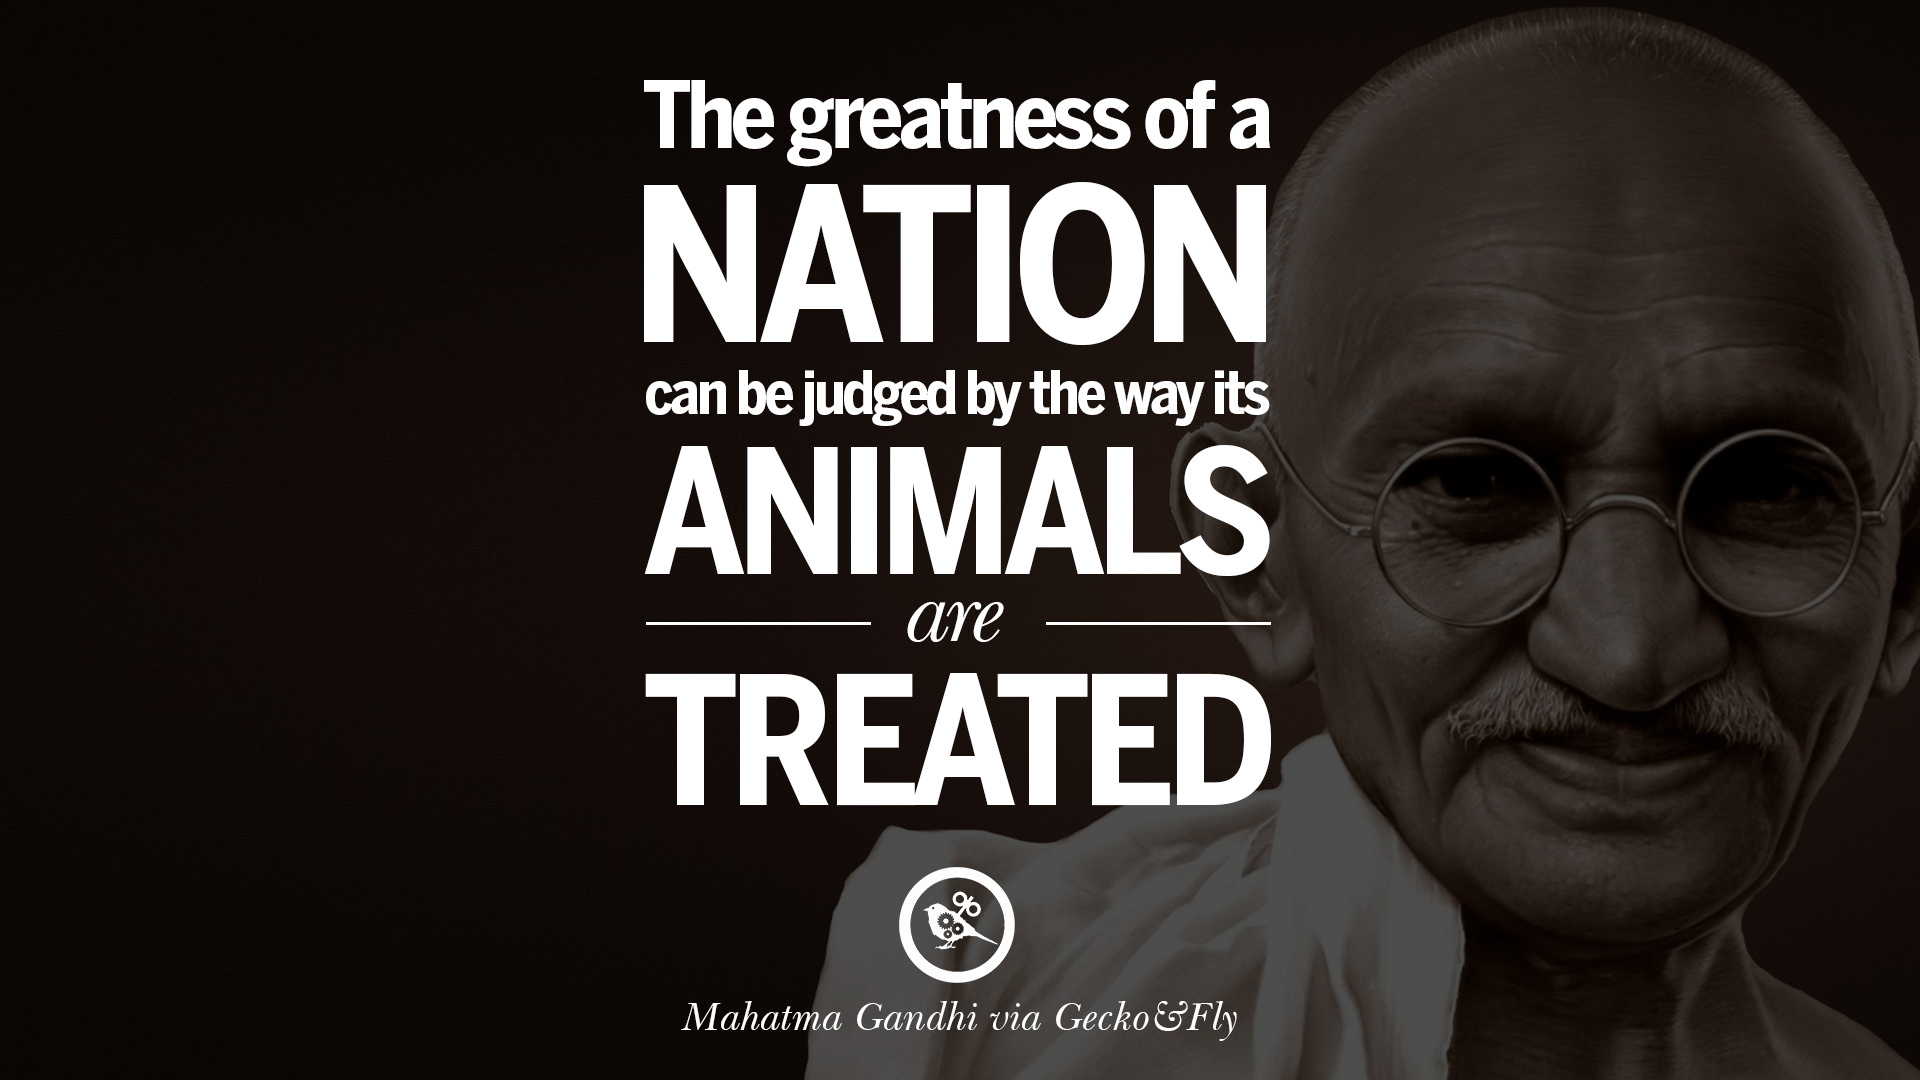 Mahatma Gandhi Quotes And Frases On Peace, Protest, and Civil Liberties